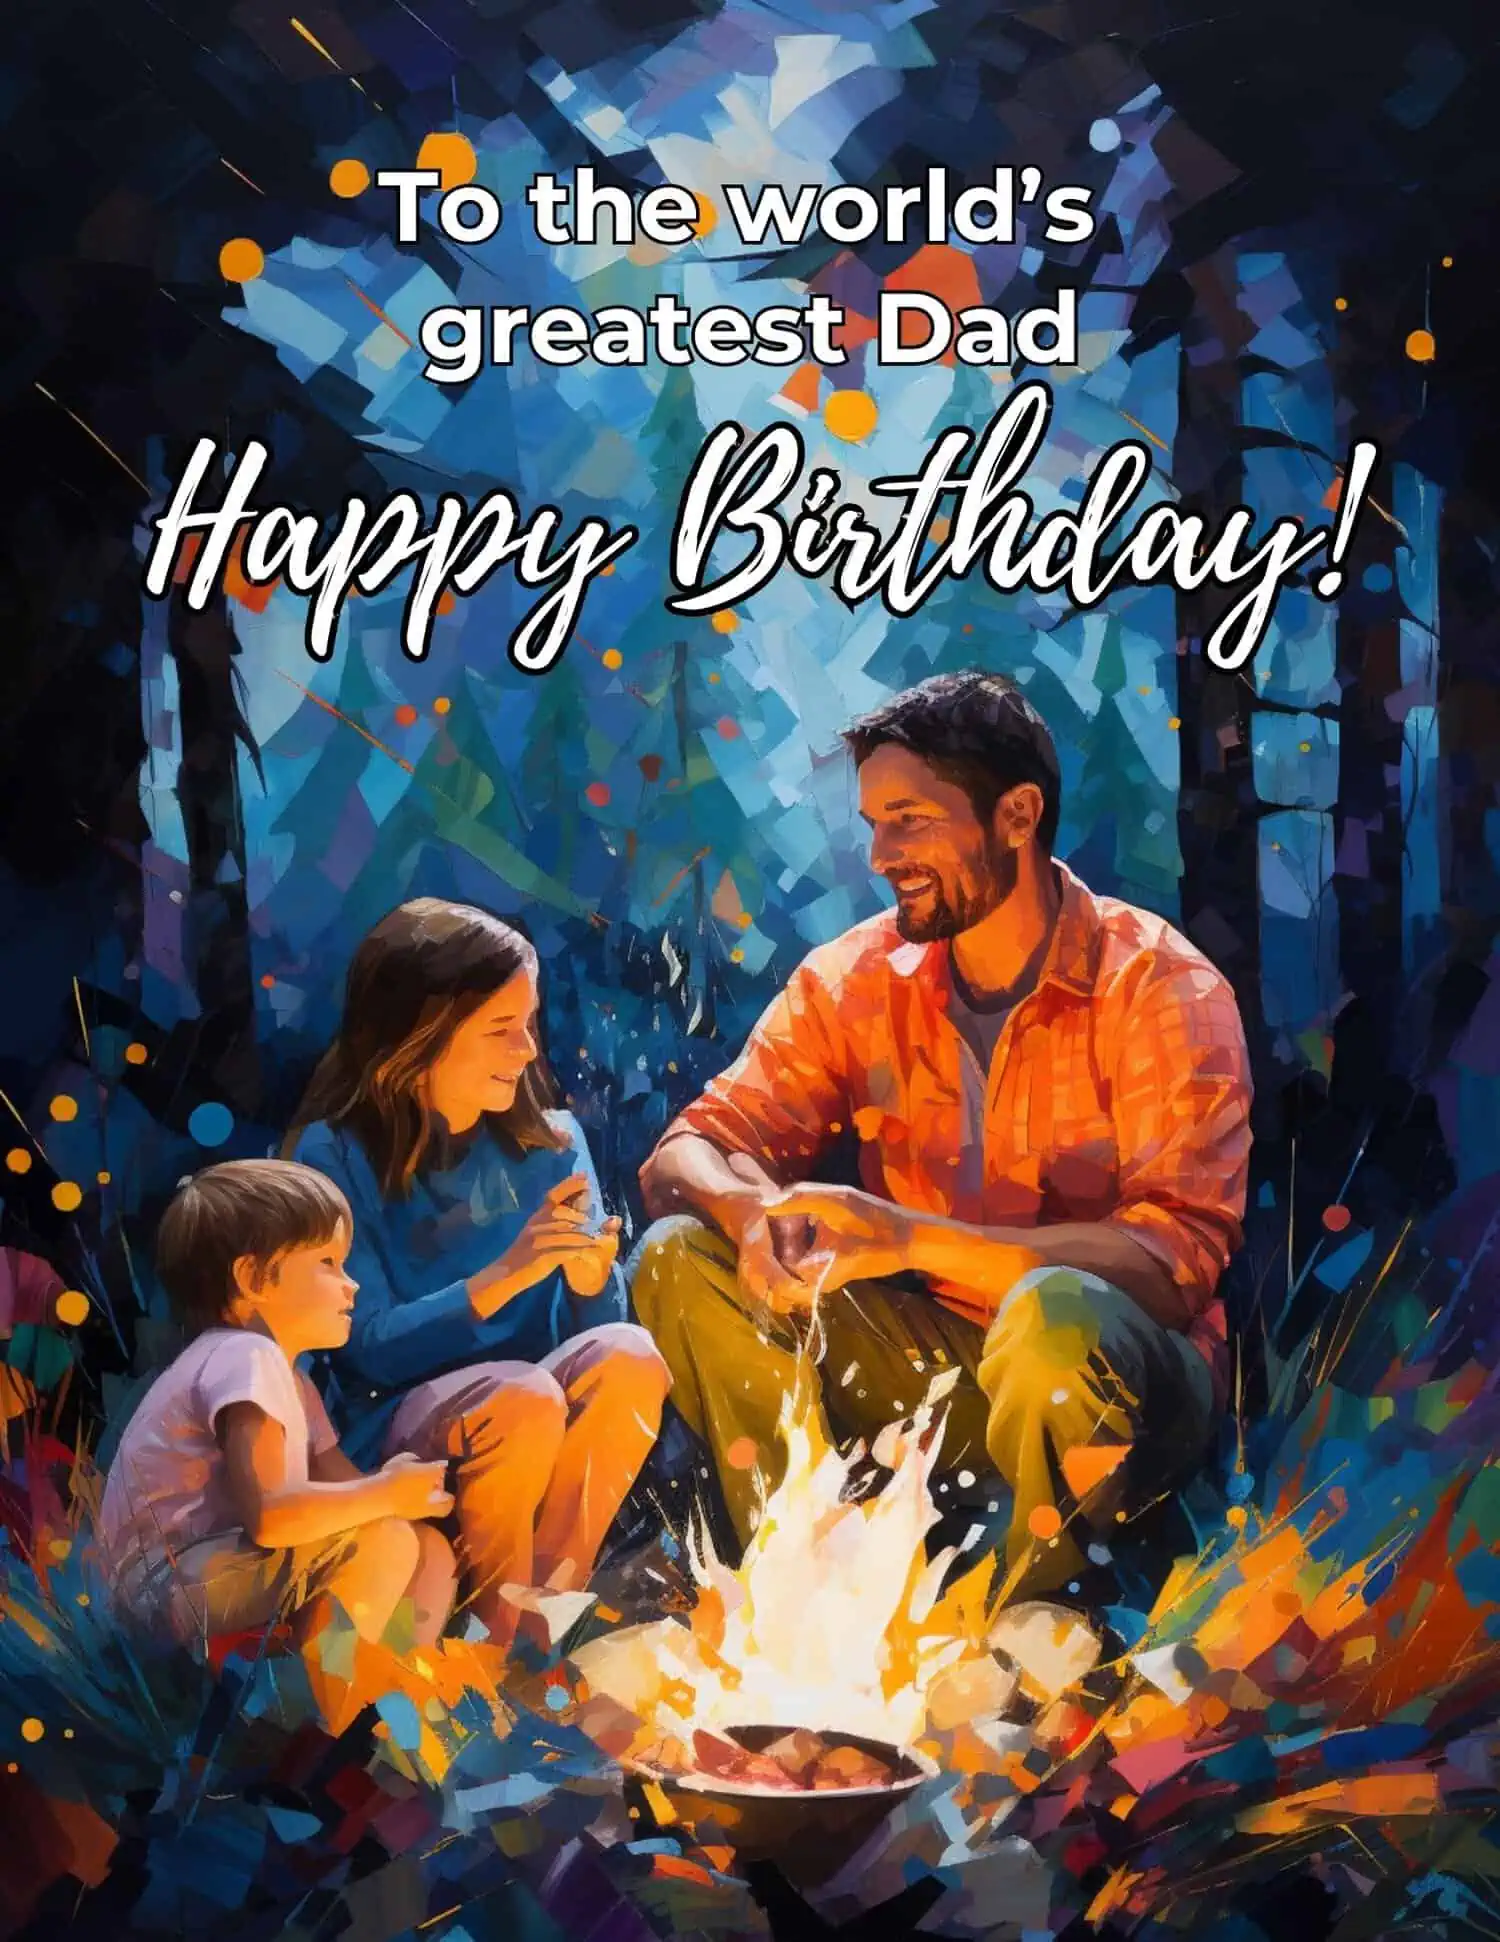 Concise and touching birthday messages for your father.